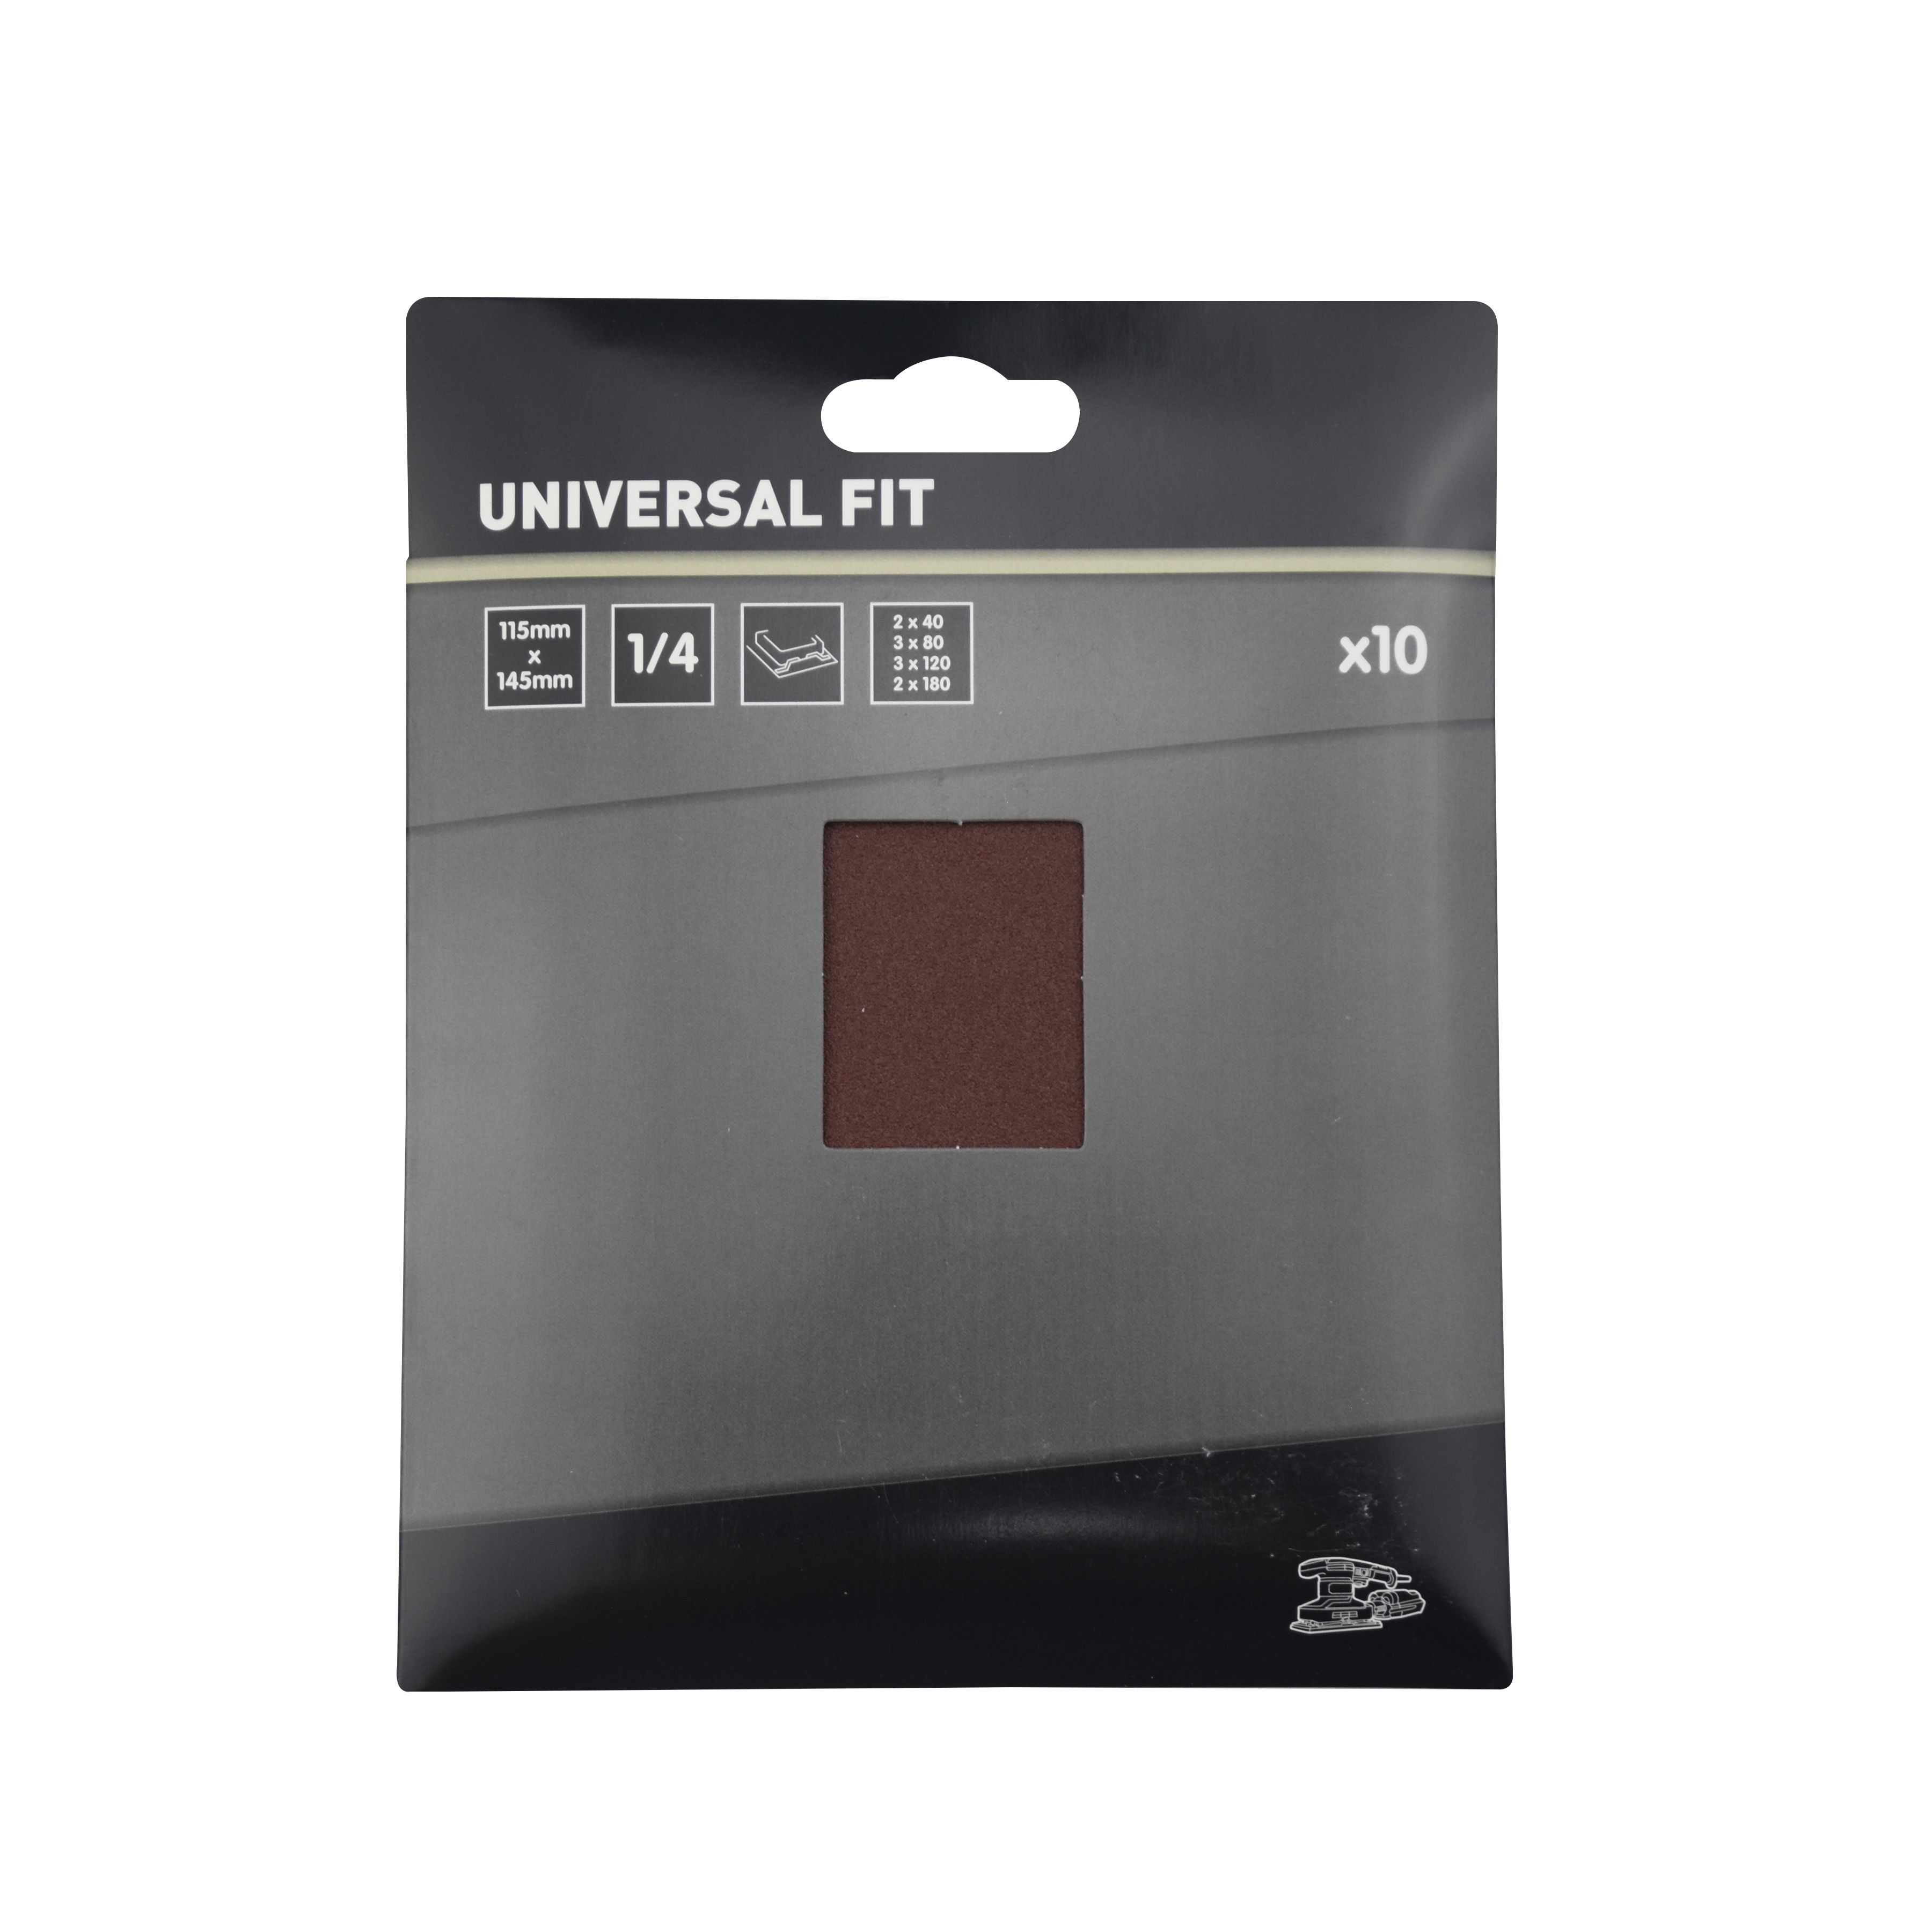 Universal Fit Assorted Unpunched 1/4 sanding sheet set (L)145mm (W)115mm, Pack of 10